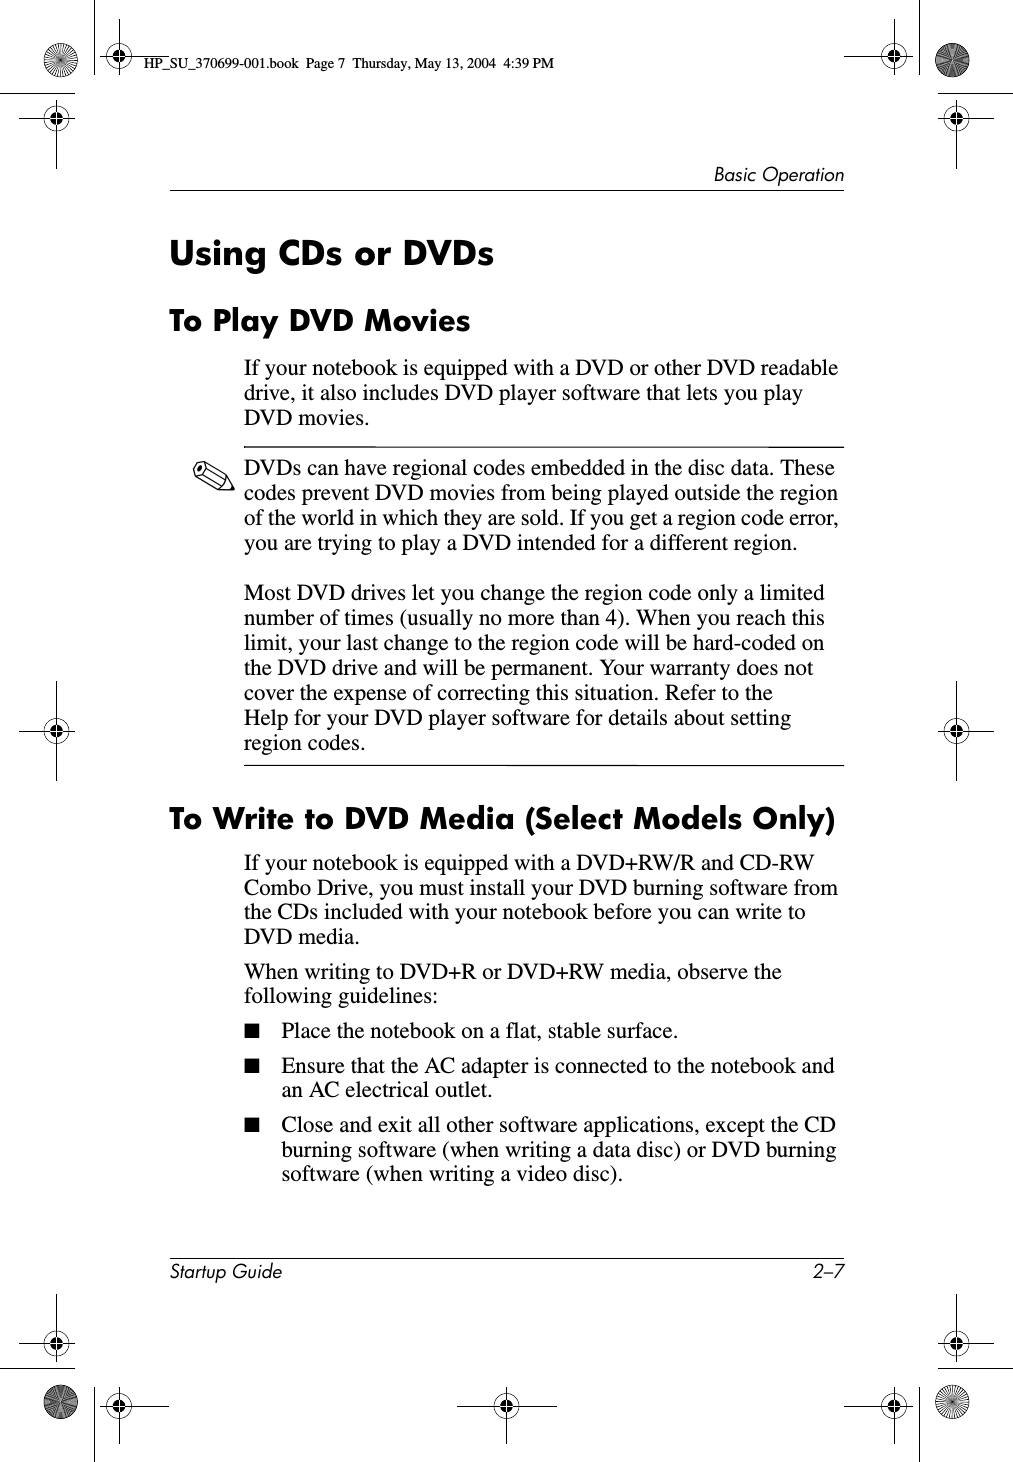 Basic OperationStartup Guide 2–7Using CDs or DVDsTo Play DVD MoviesIf your notebook is equipped with a DVD or other DVD readable drive, it also includes DVD player software that lets you play DVD movies.✎DVDs can have regional codes embedded in the disc data. These codes prevent DVD movies from being played outside the region of the world in which they are sold. If you get a region code error, you are trying to play a DVD intended for a different region.Most DVD drives let you change the region code only a limited number of times (usually no more than 4). When you reach this limit, your last change to the region code will be hard-coded on the DVD drive and will be permanent. Your warranty does not cover the expense of correcting this situation. Refer to the Help for your DVD player software for details about setting region codes.To Write to DVD Media (Select Models Only)If your notebook is equipped with a DVD+RW/R and CD-RW Combo Drive, you must install your DVD burning software from the CDs included with your notebook before you can write to DVD media.When writing to DVD+R or DVD+RW media, observe the following guidelines:■Place the notebook on a flat, stable surface.■Ensure that the AC adapter is connected to the notebook and an AC electrical outlet.■Close and exit all other software applications, except the CD burning software (when writing a data disc) or DVD burning software (when writing a video disc).HP_SU_370699-001.book  Page 7  Thursday, May 13, 2004  4:39 PM